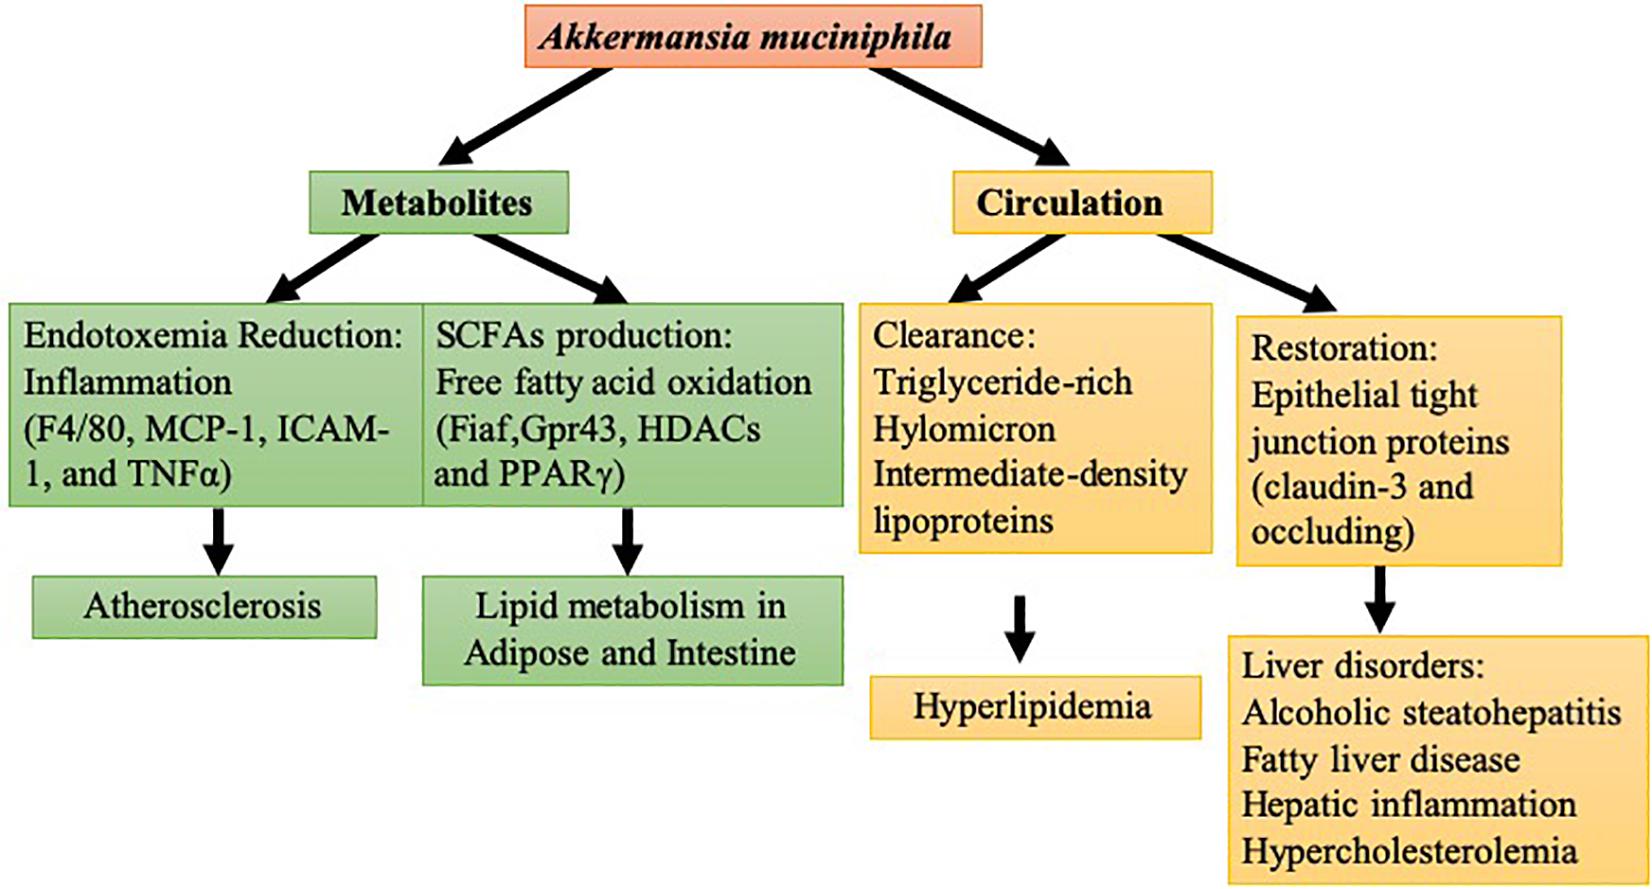 sagging fiber dvs. Frontiers | Function of Akkermansia muciniphila in Obesity: Interactions  With Lipid Metabolism, Immune Response and Gut Systems | Microbiology